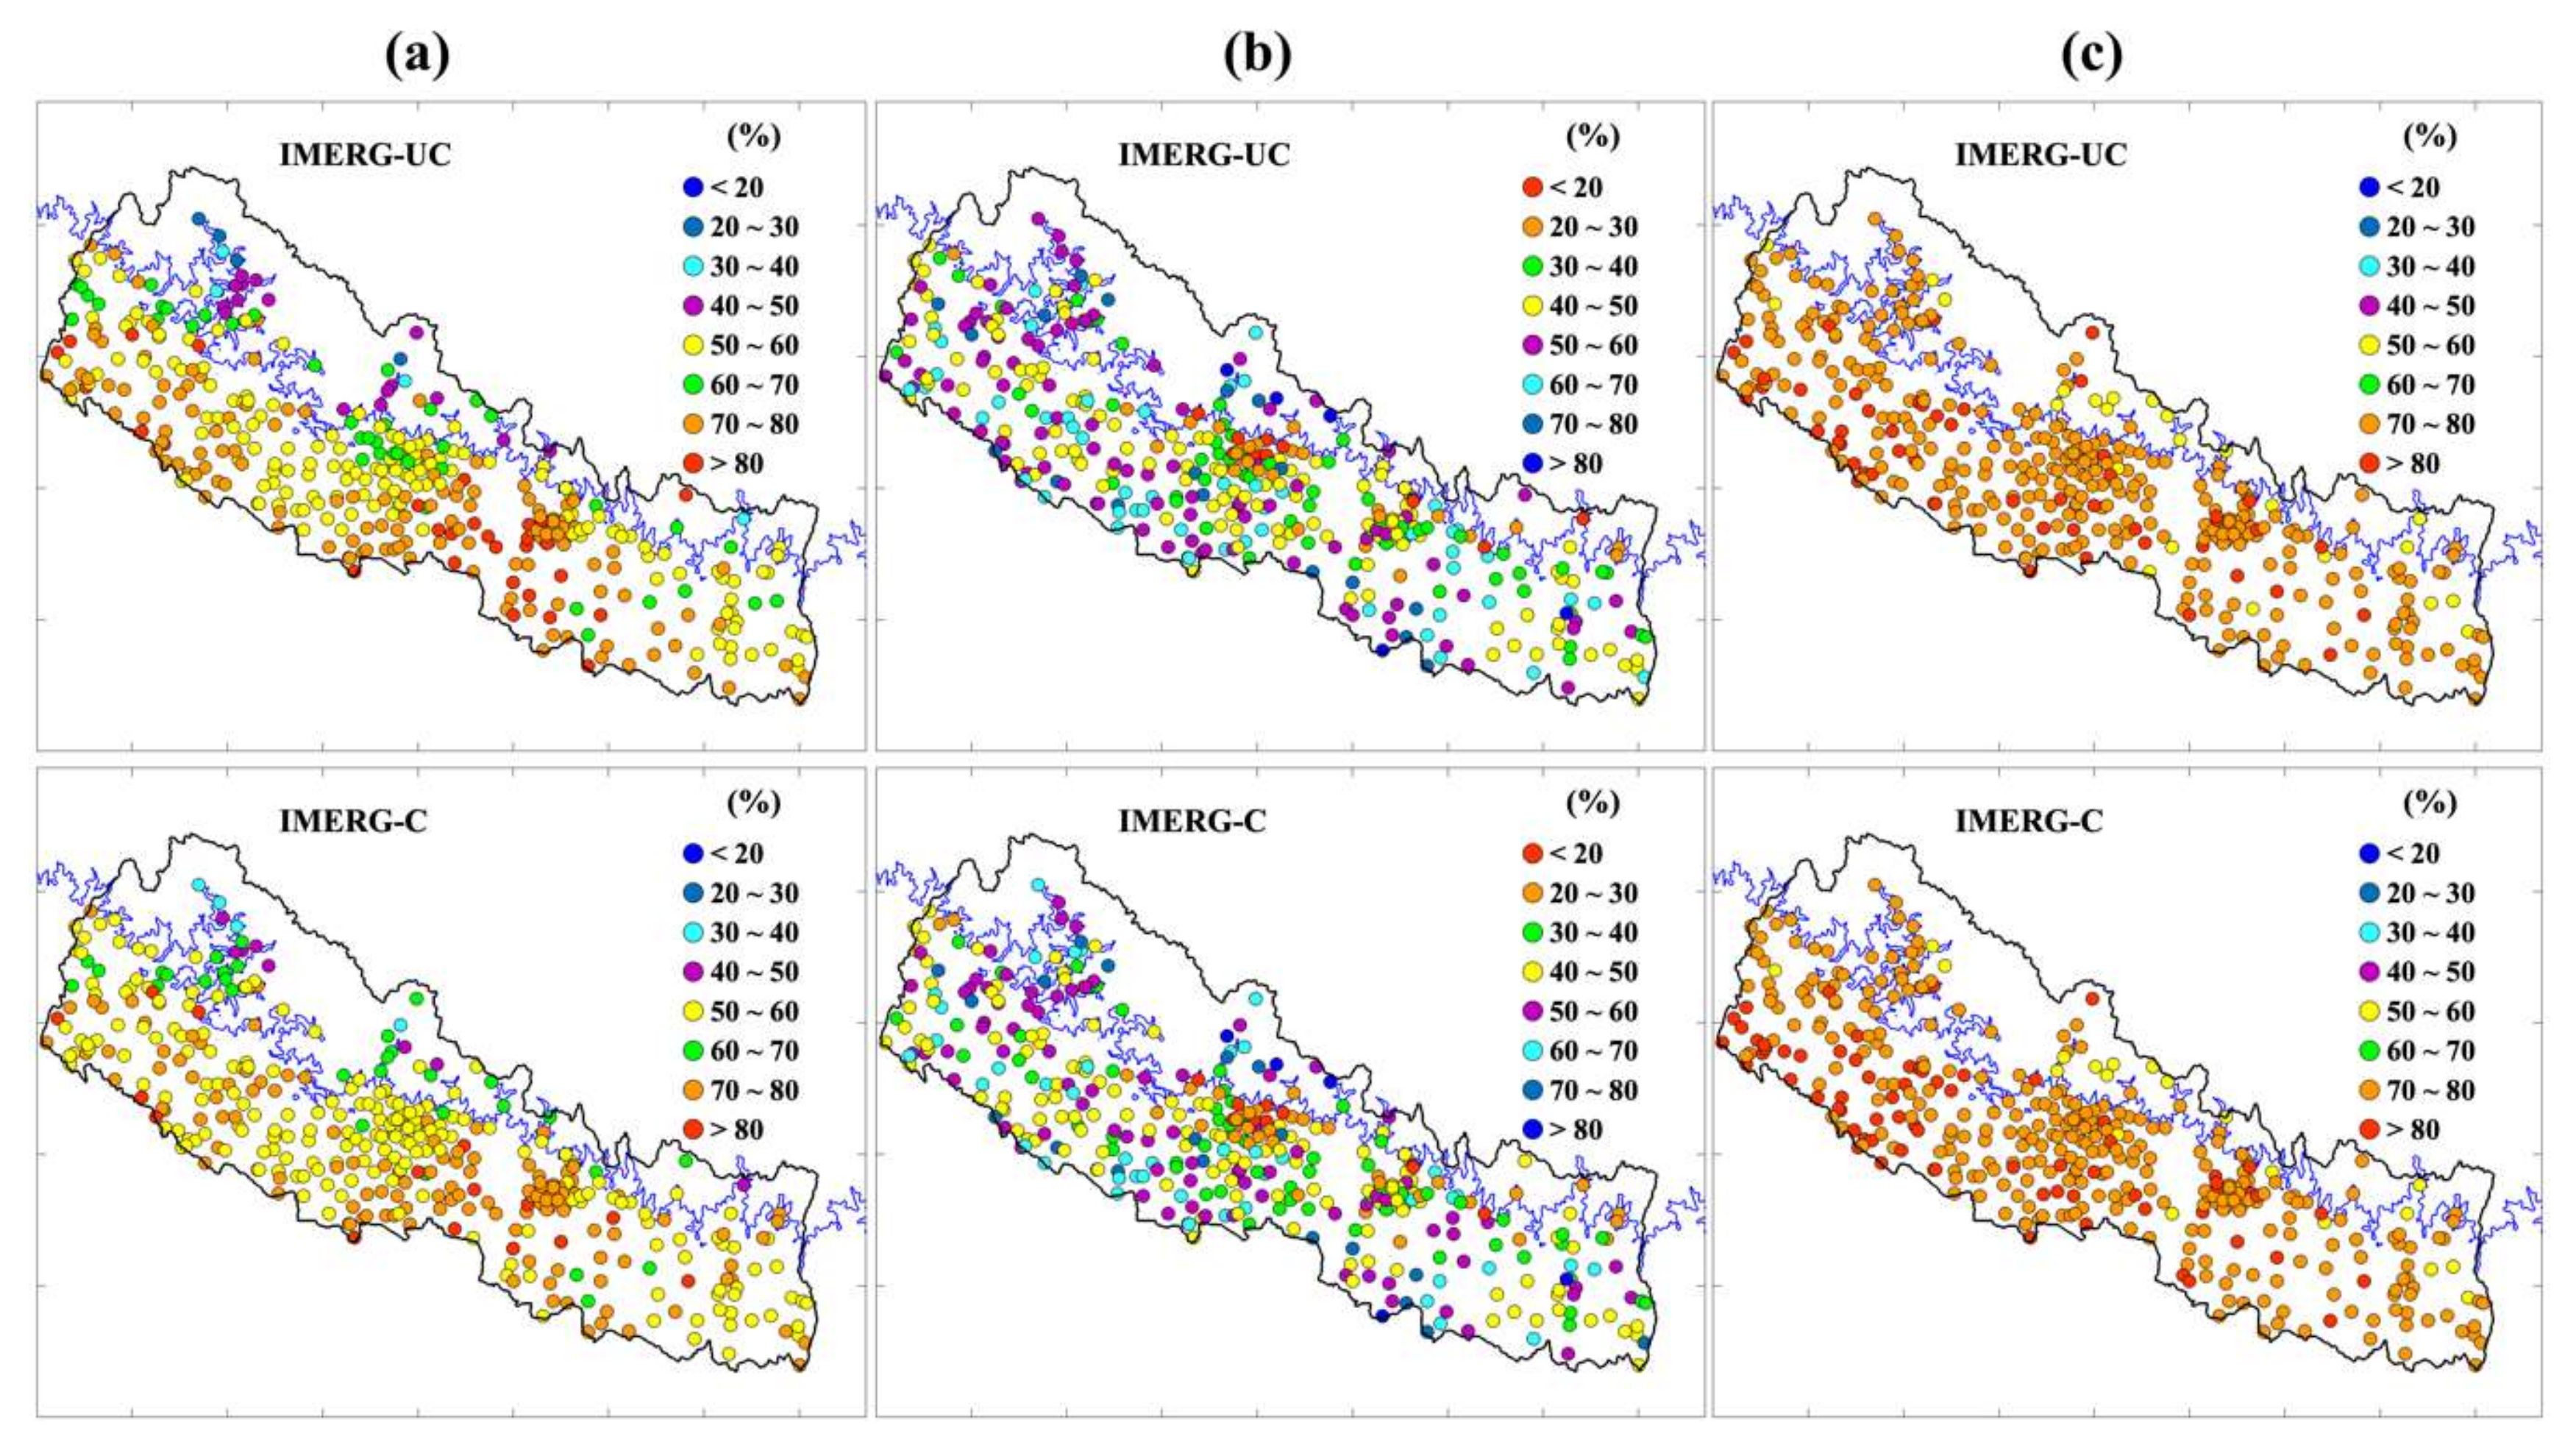 Remote Sensing Free Full Text Evaluation Of Gpm Era Satellite Precipitation Products On The Southern Slopes Of The Central Himalayas Against Rain Gauge Data Html